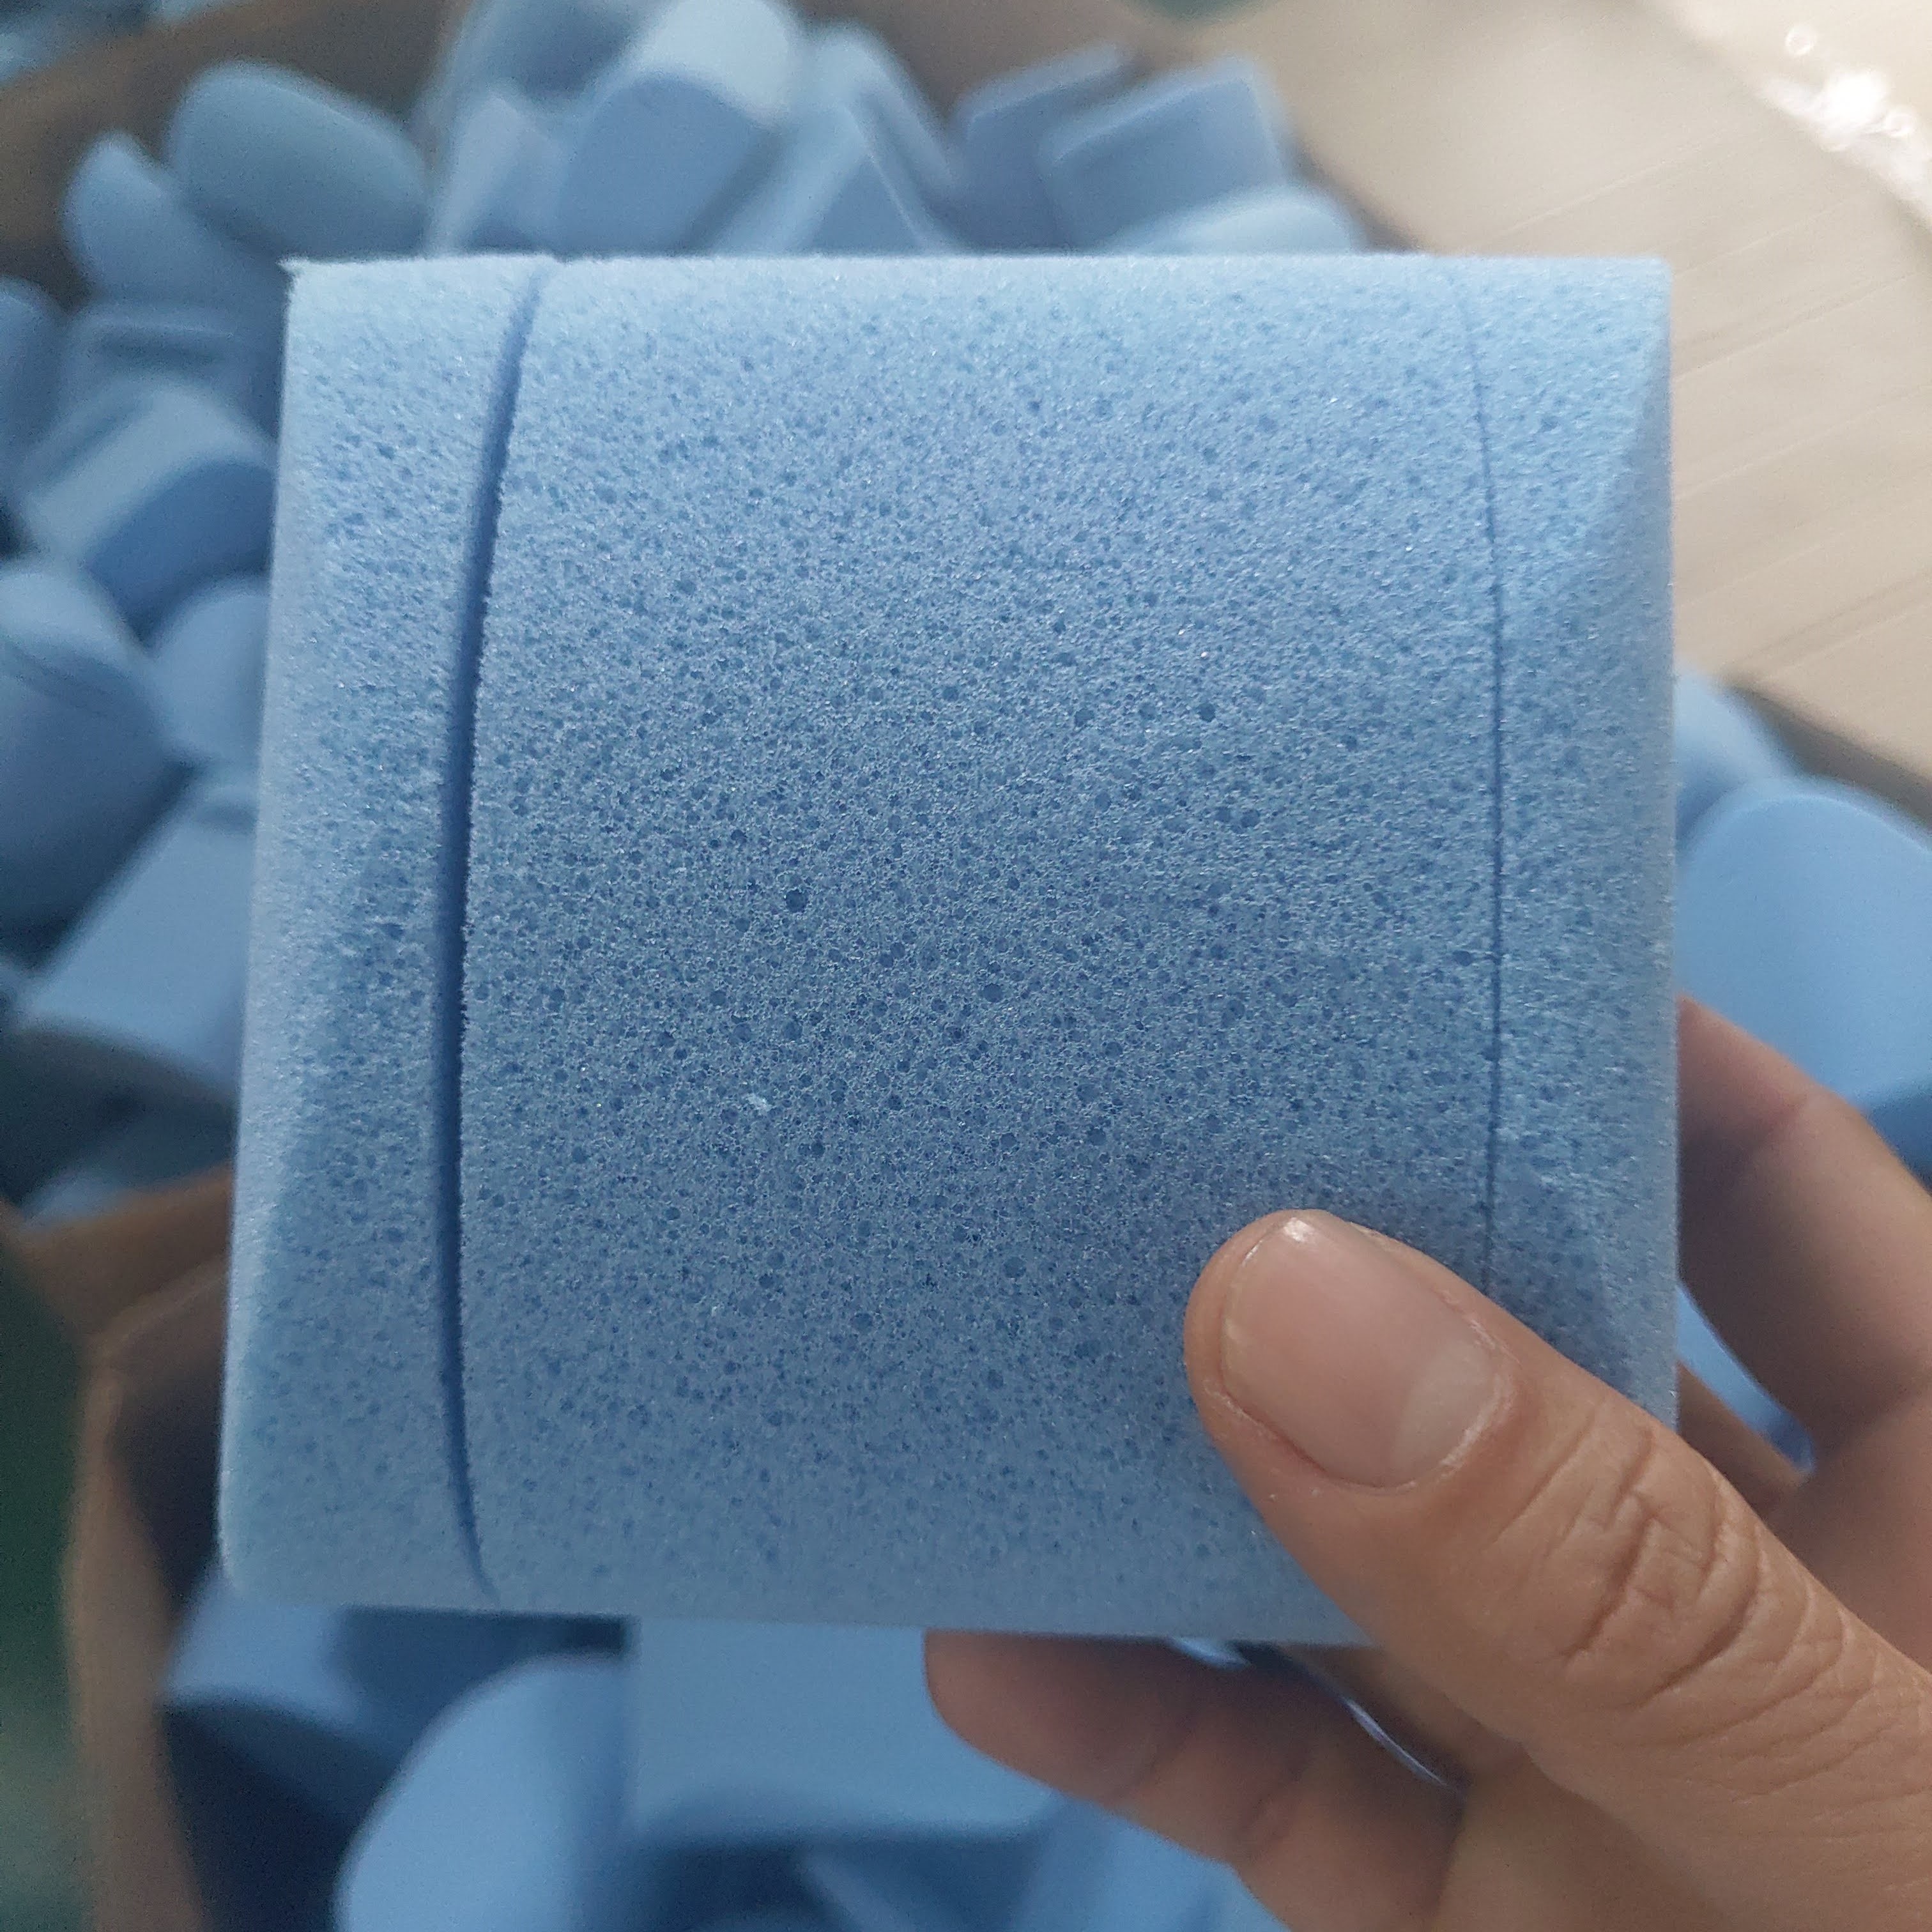 Polyurethane Foam Furniture Fast Delivery Non-Toxic Packaging Industry Resistant Shock Proof Pallets from Vietnam Manufacturer